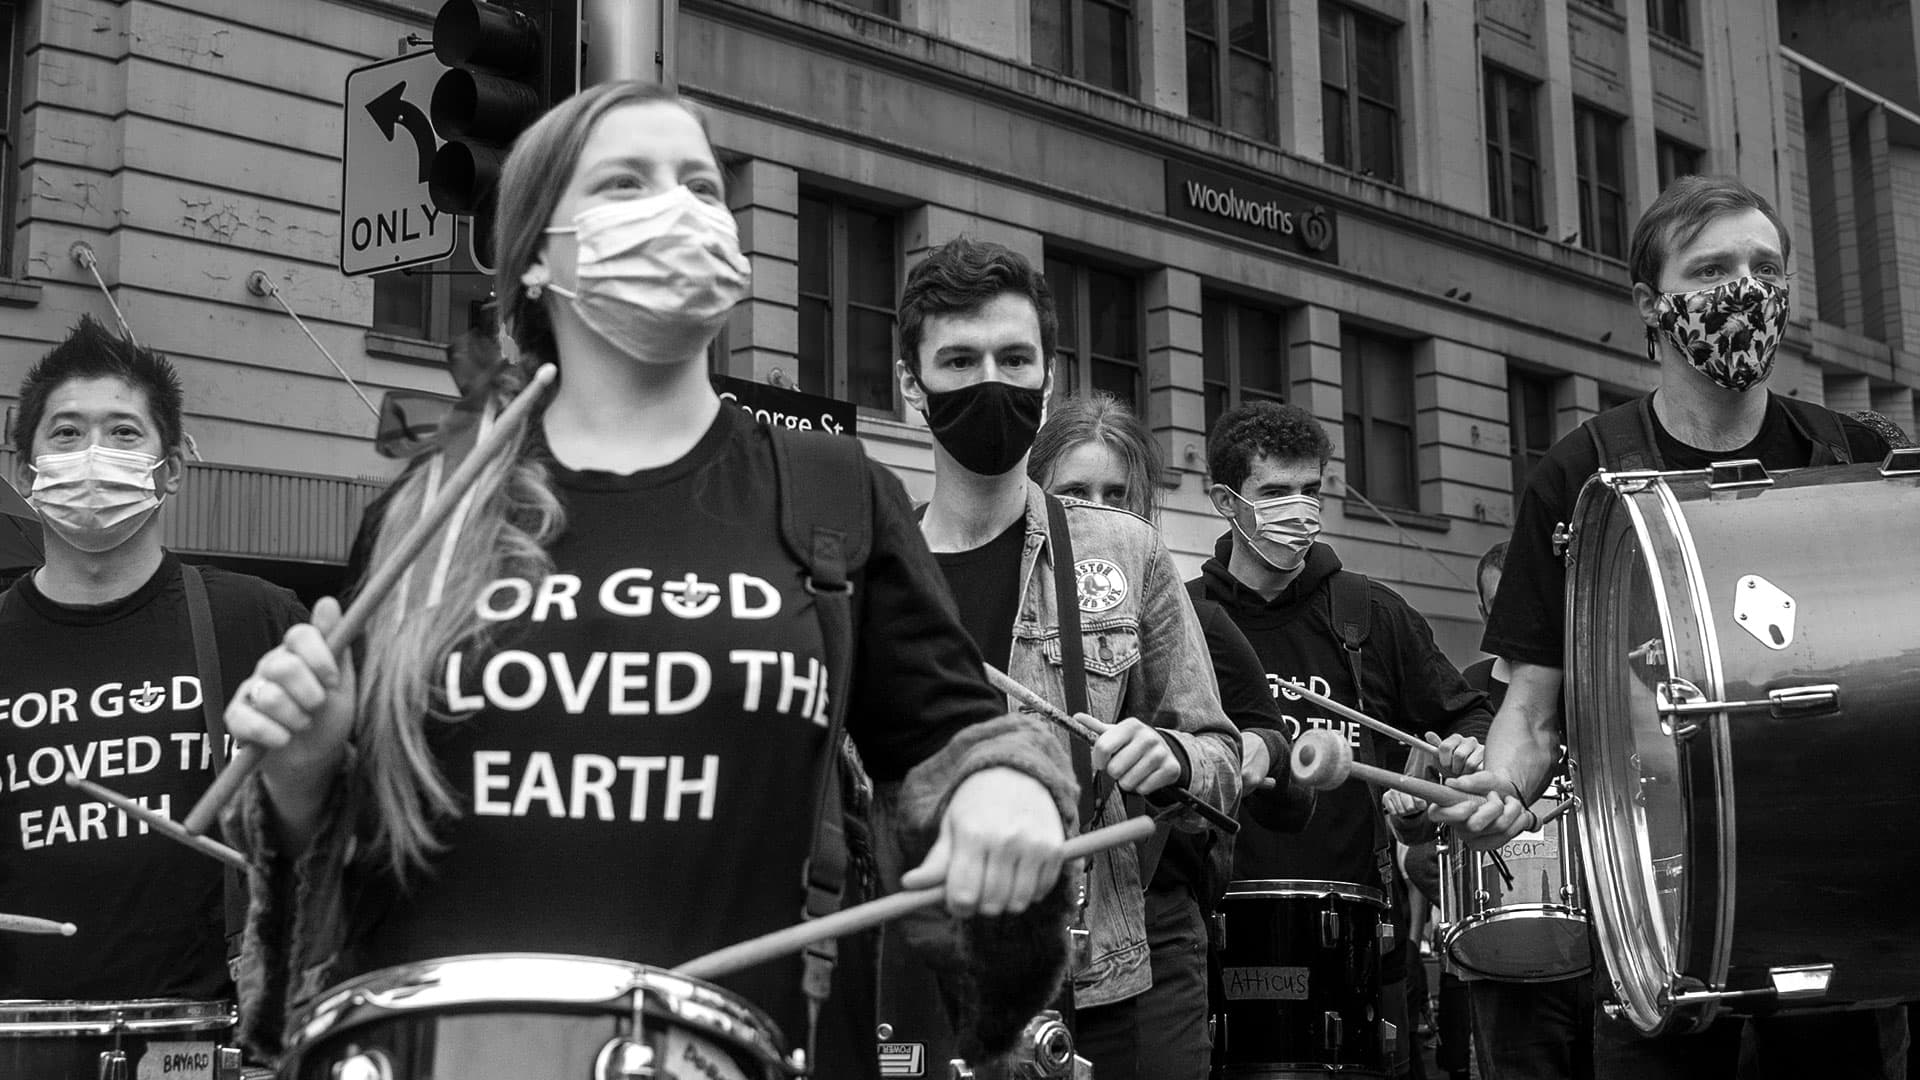 A group of activists wearing masks and playing drums during a street demonstration, united by a cause, with the prominent message on a participant's shirt expressing environmental concern.